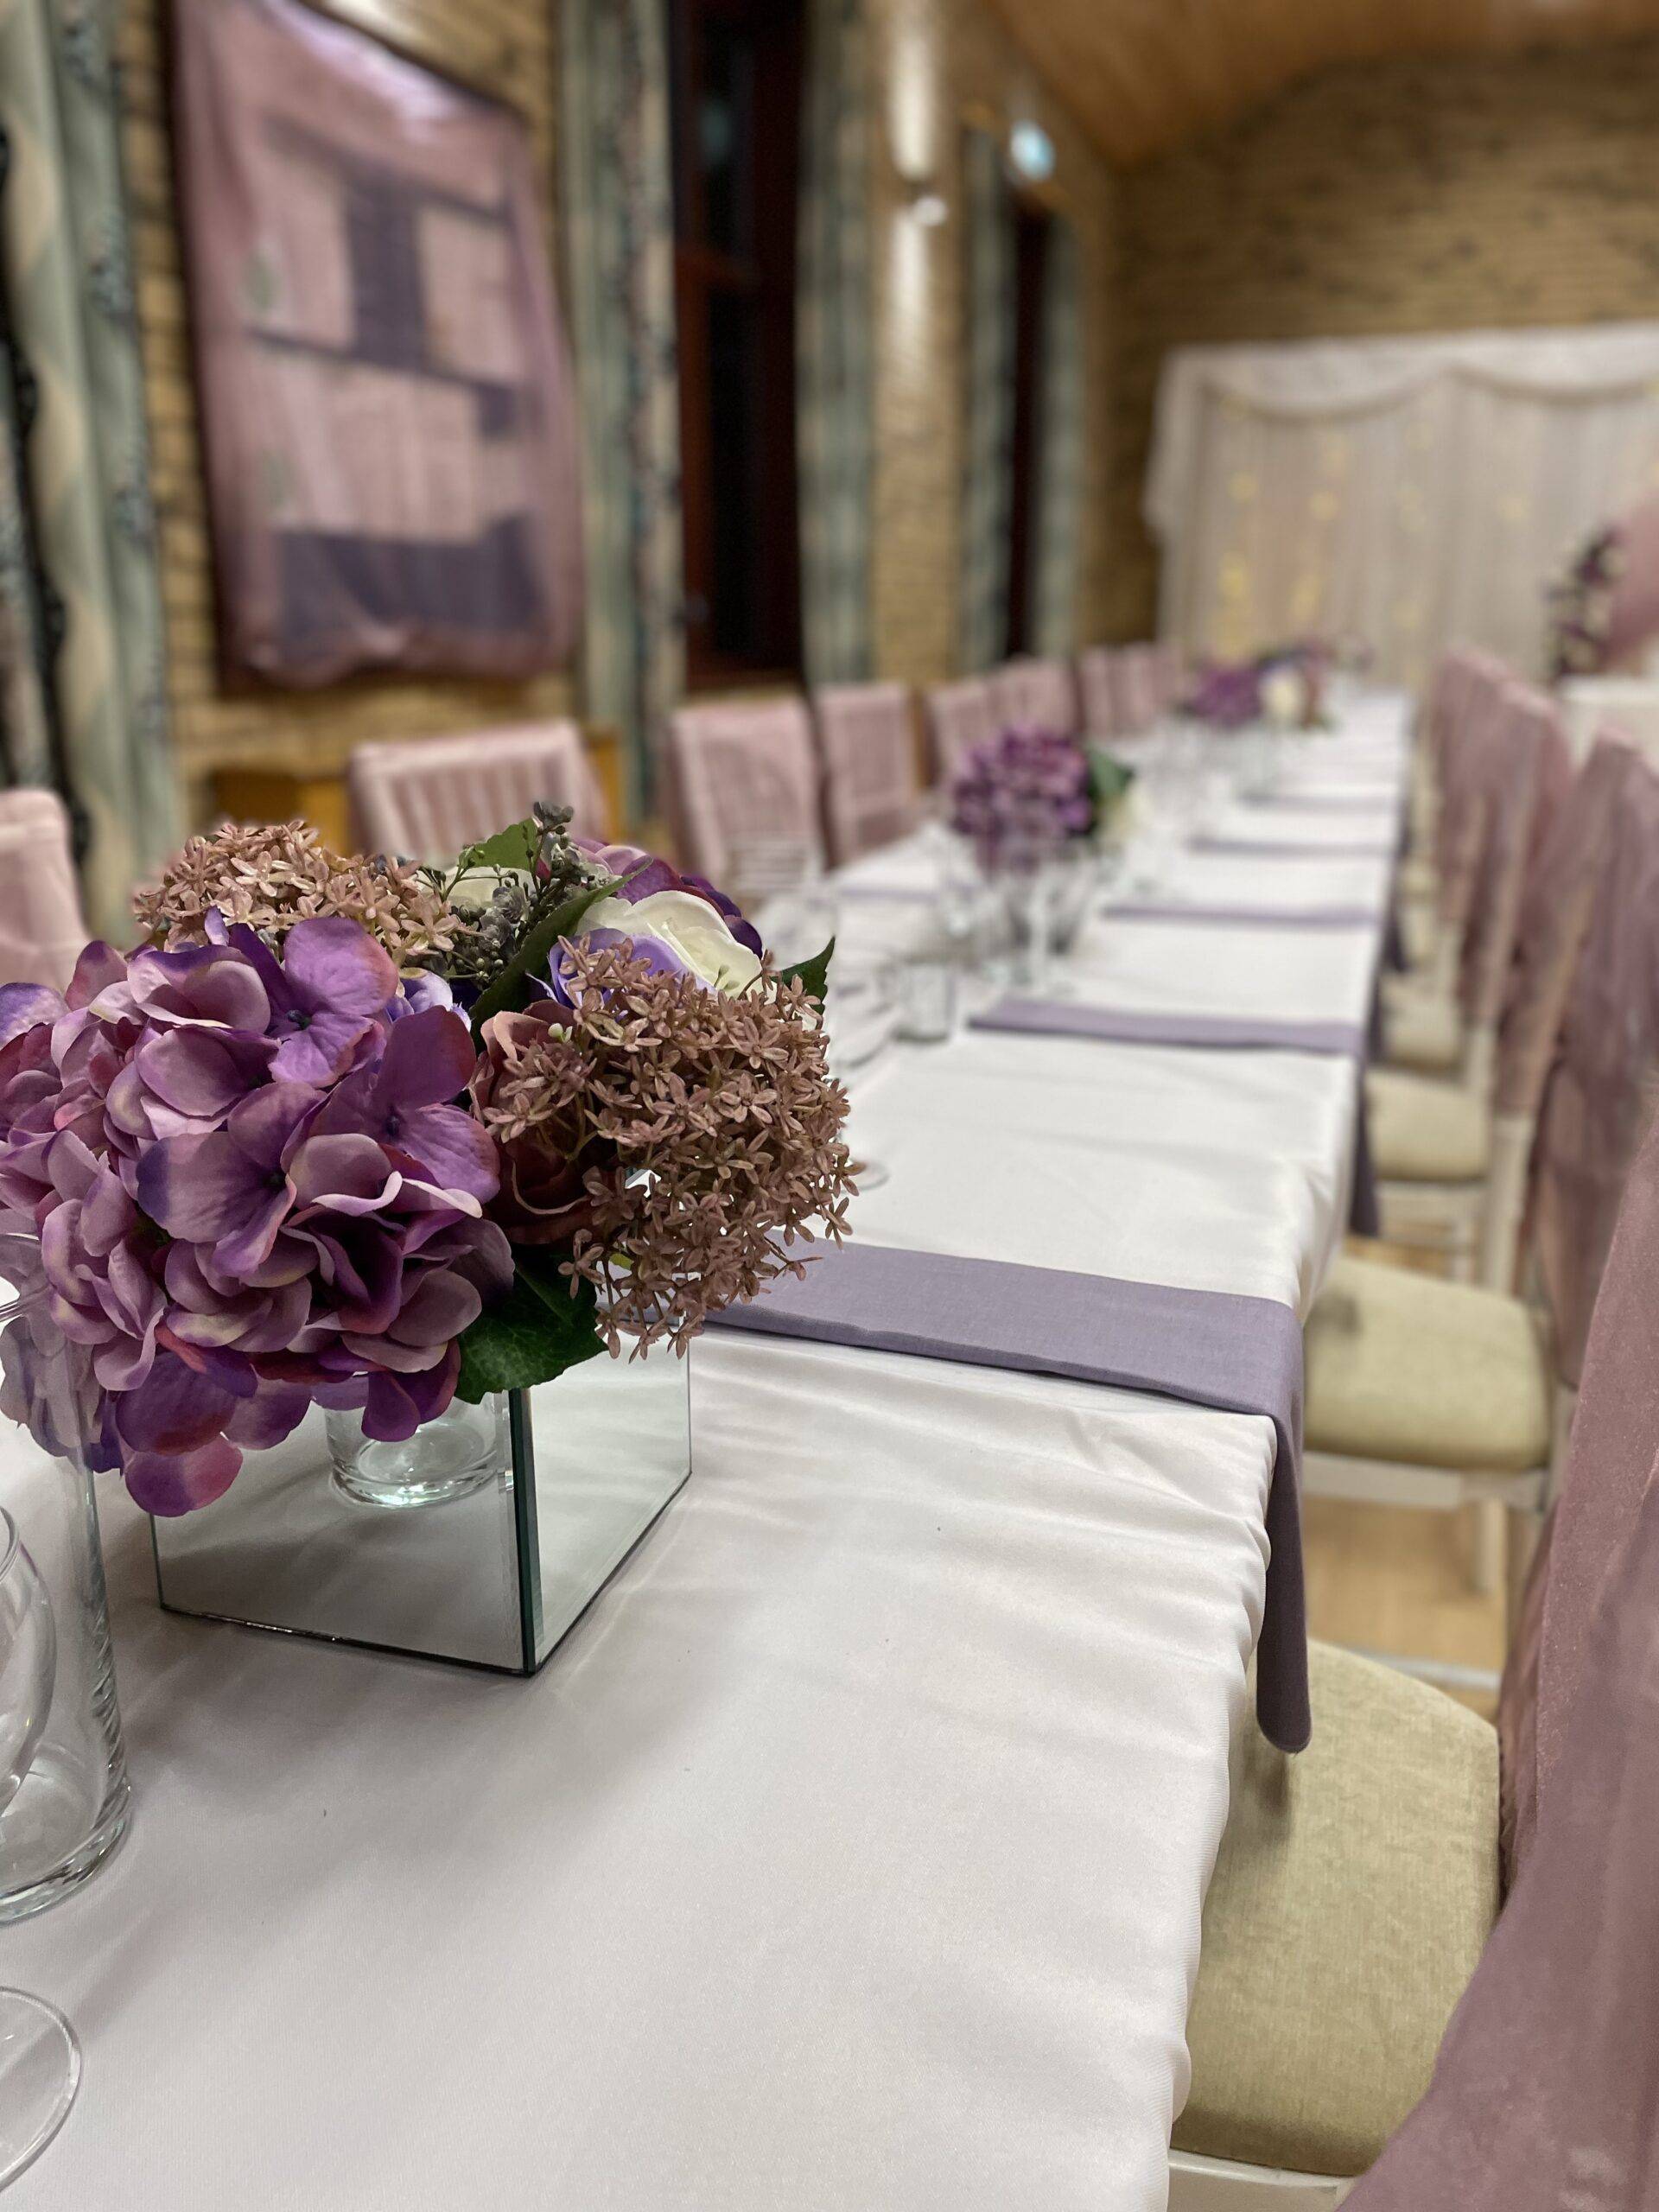 a long table with a vase of flowers on it.